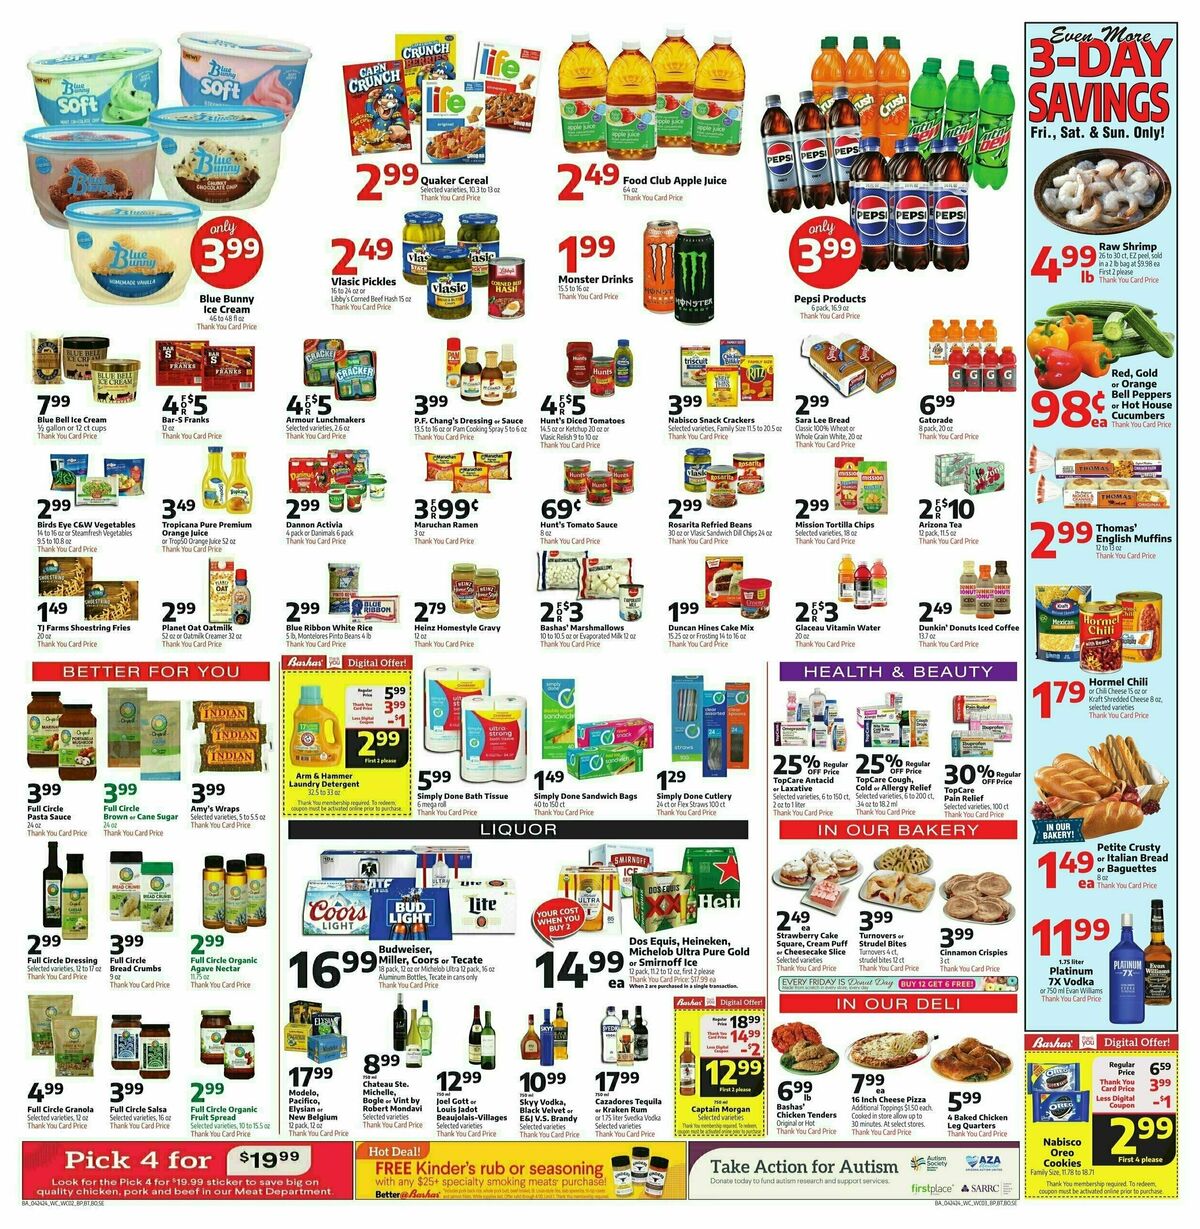 Bashas Weekly Ad from April 24